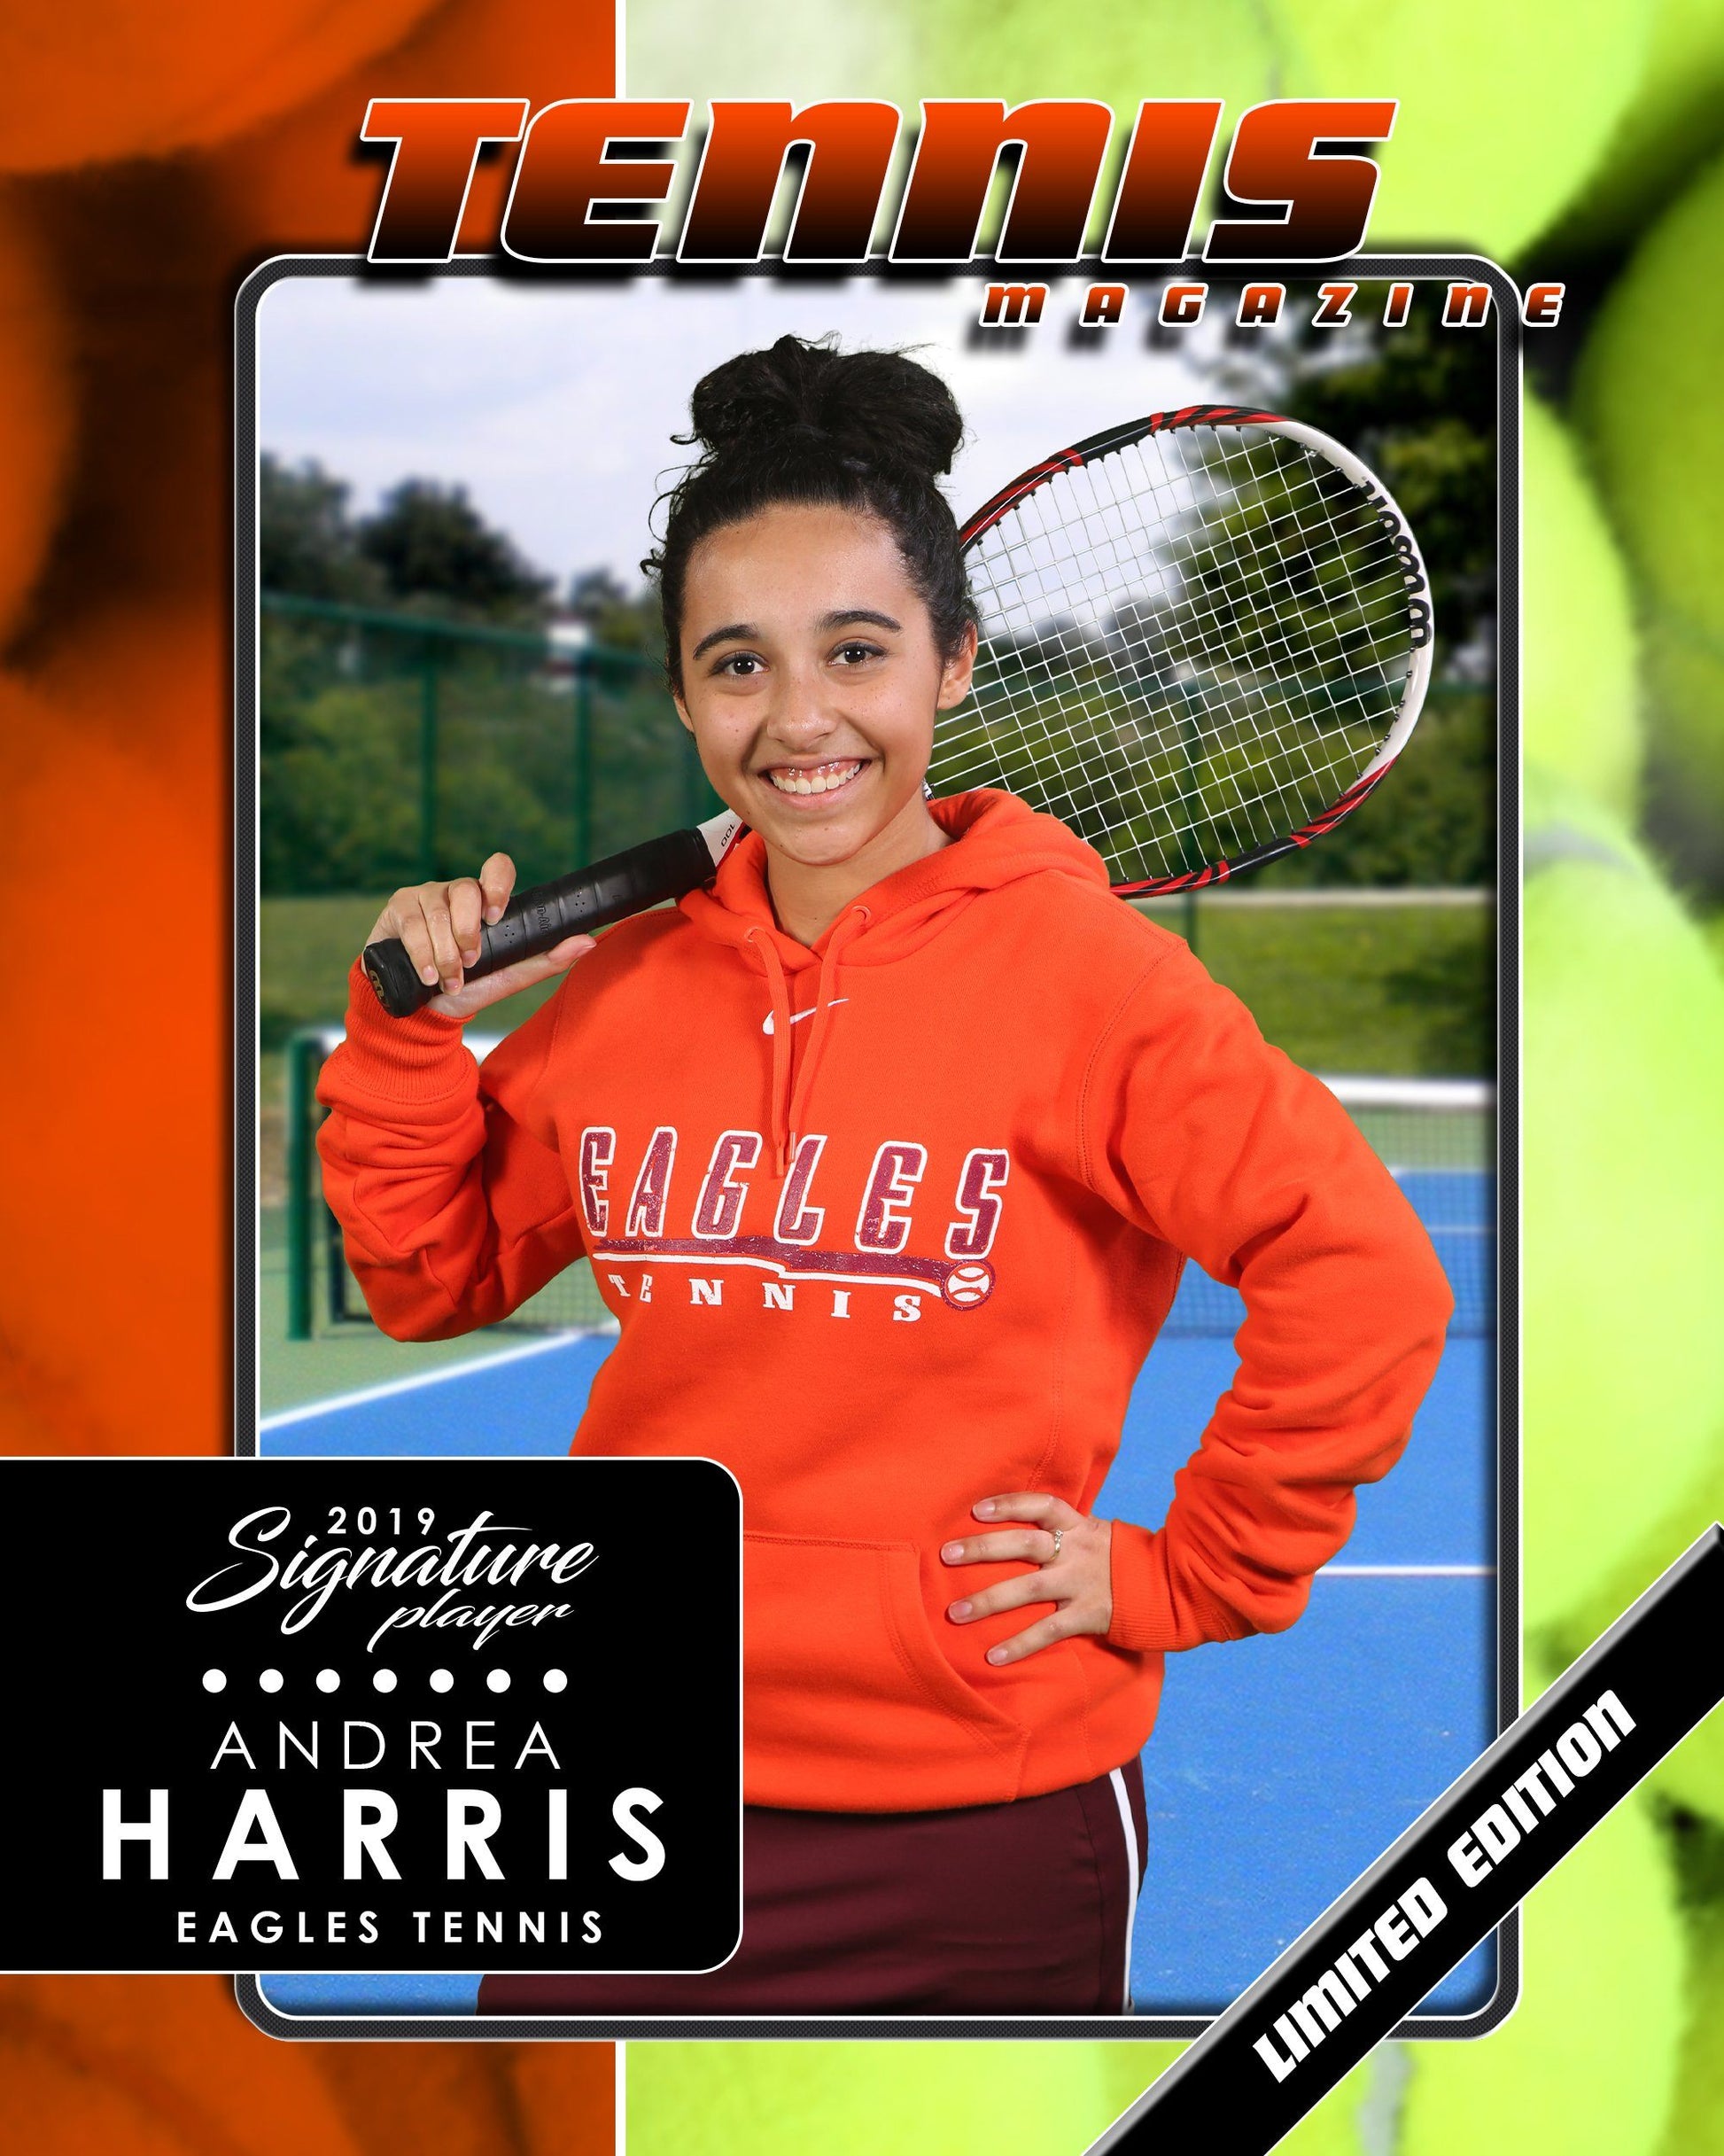 Signature Player - Tennis - V1 - Drop-In Magazine Cover Template-Photoshop Template - Photo Solutions